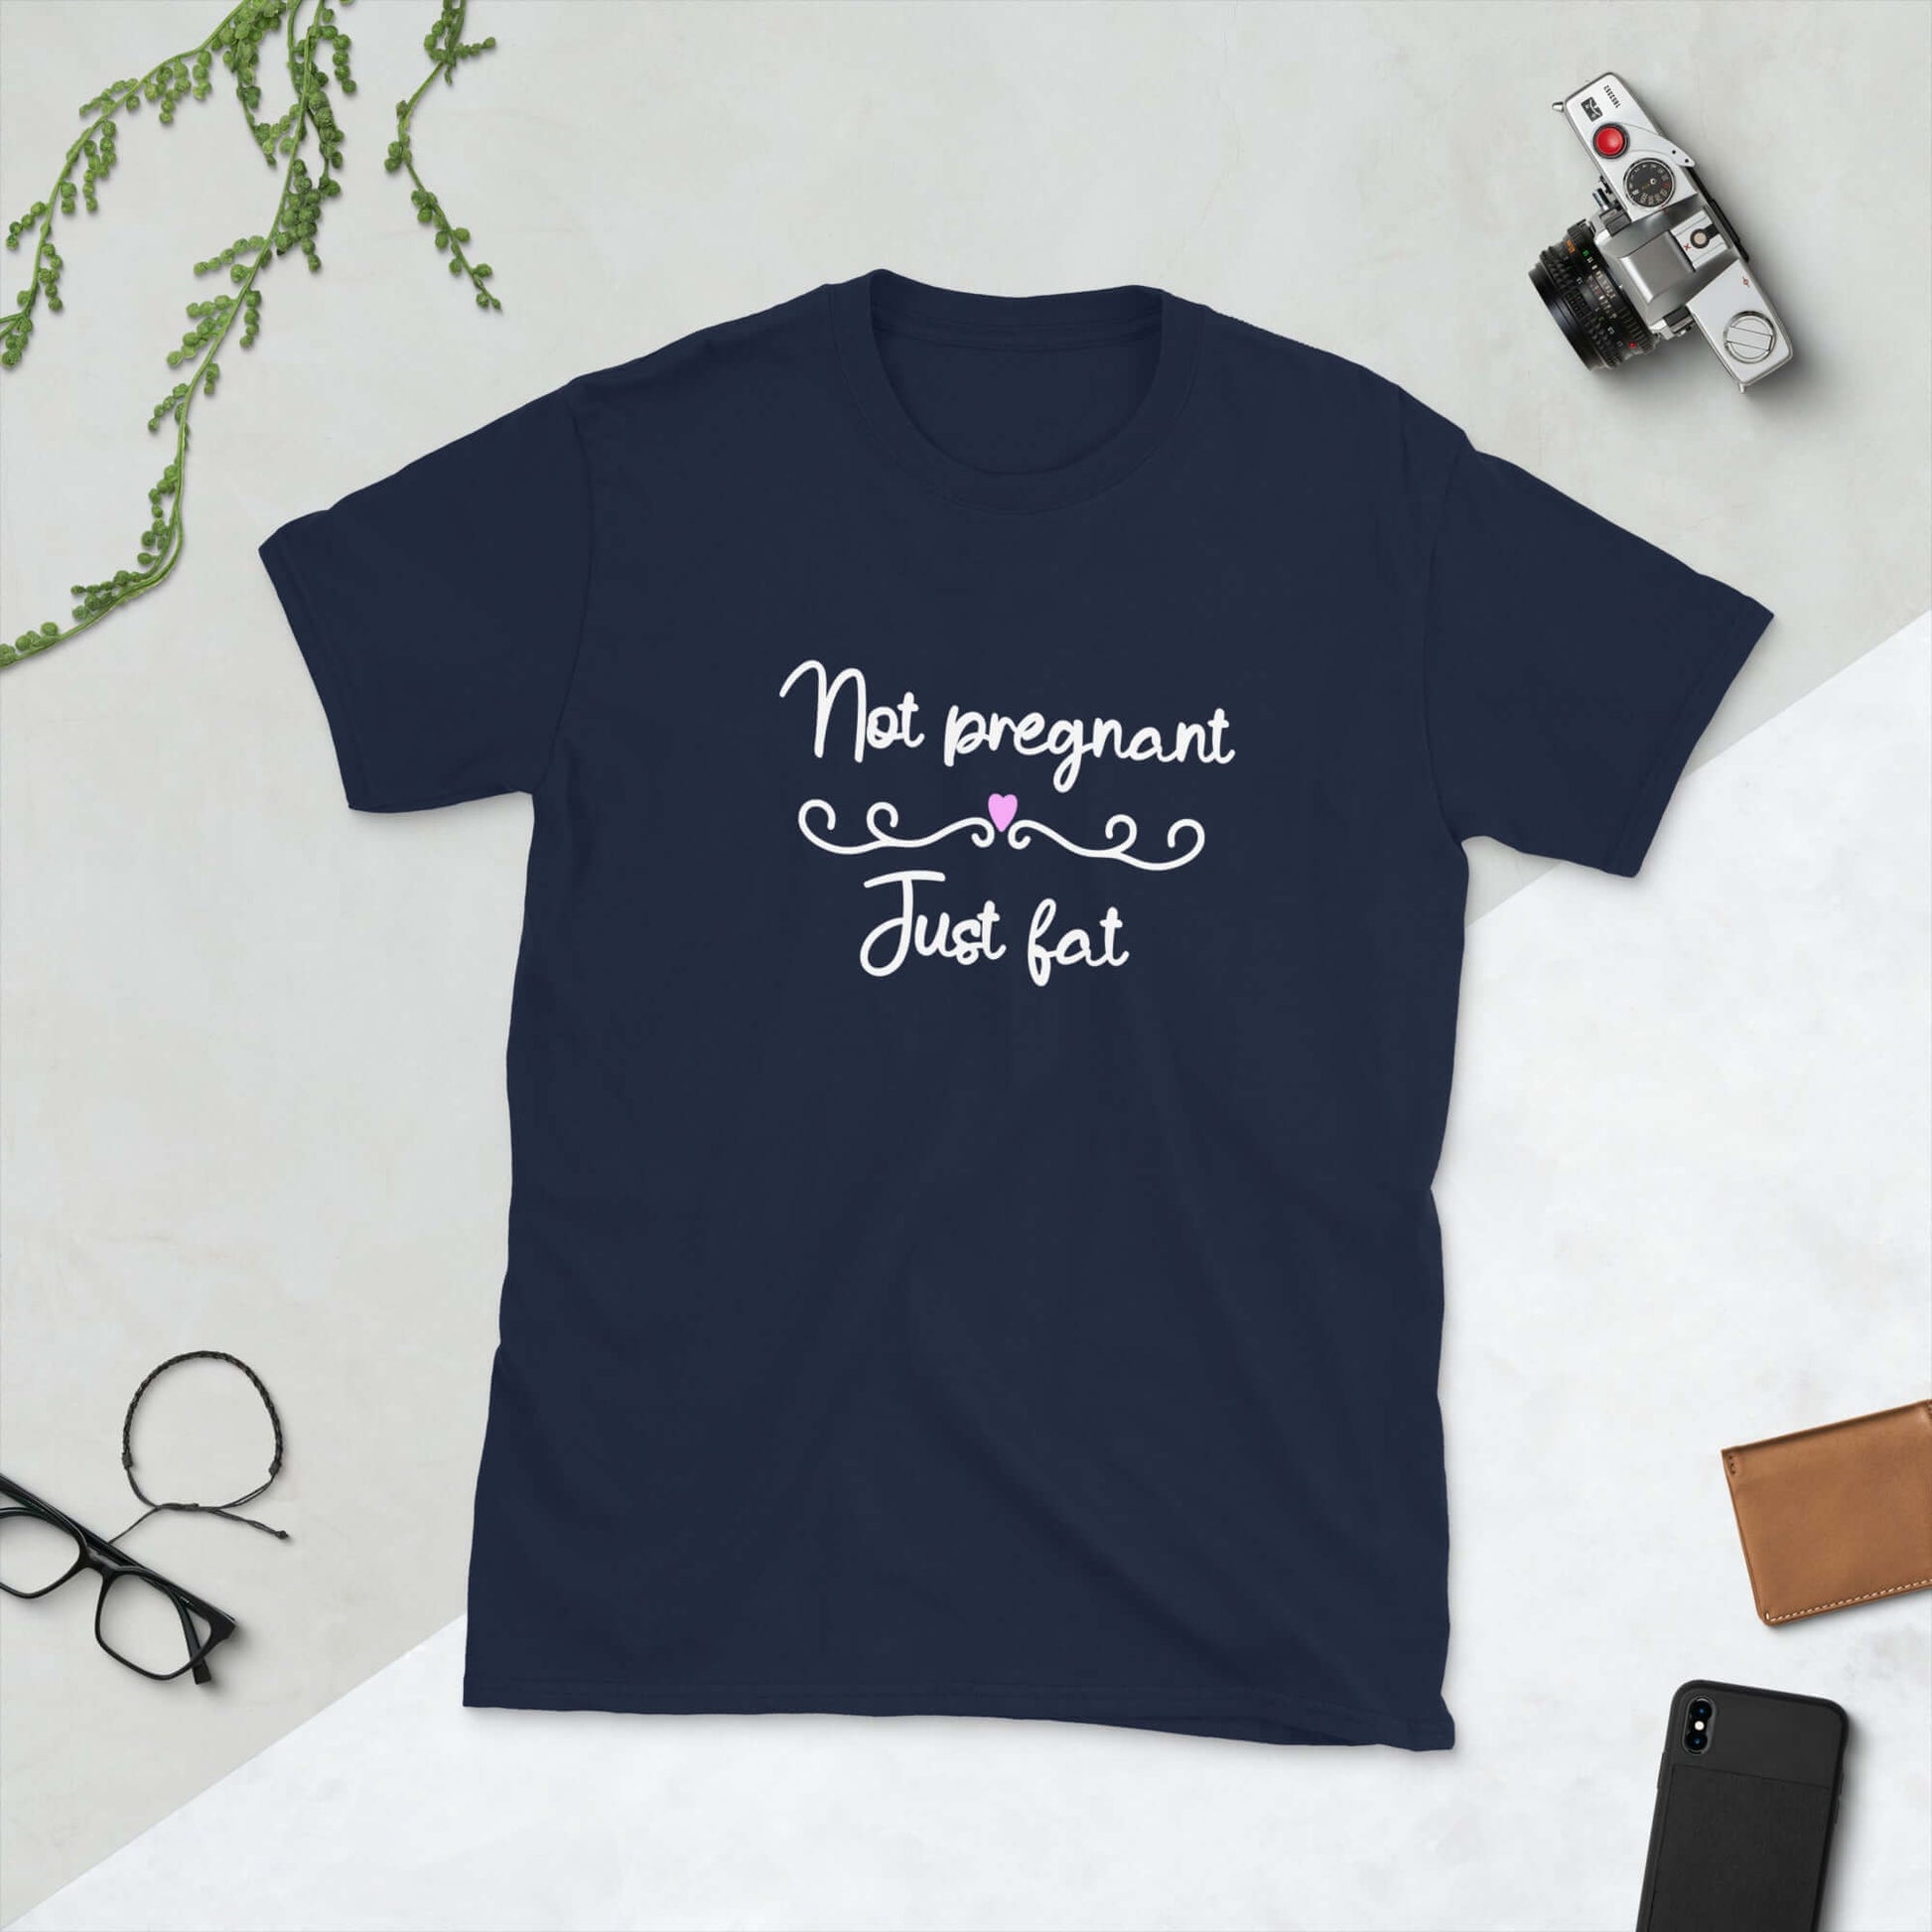 Navy blue t-shirt with the words Not pregnant just fat printed on the front with a heart.